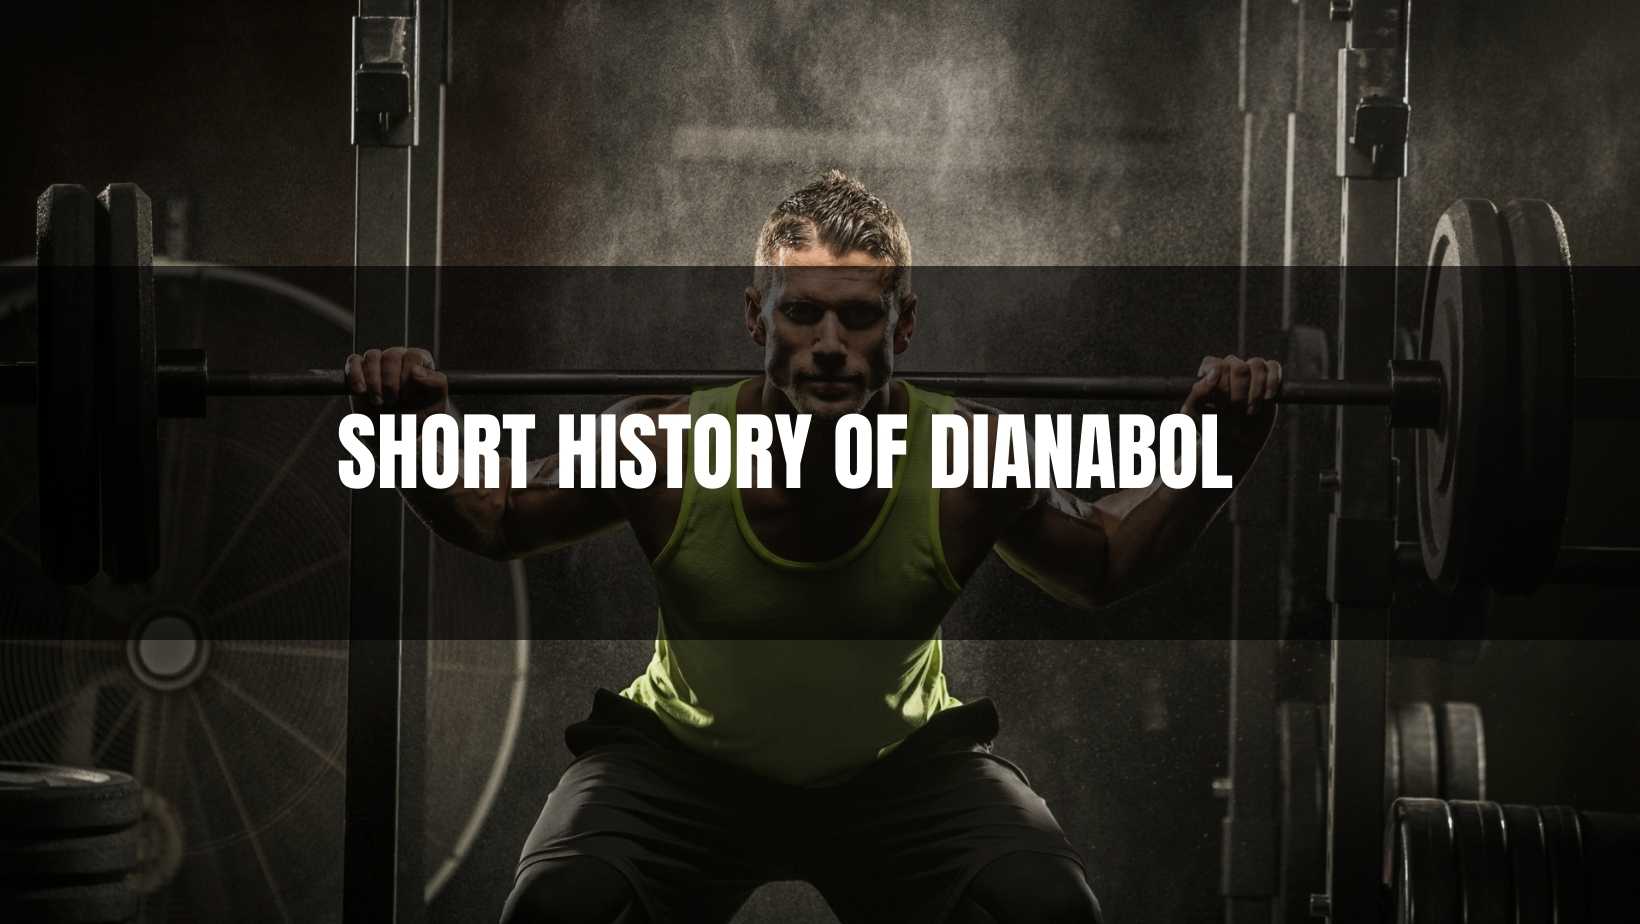 History of Dianabol